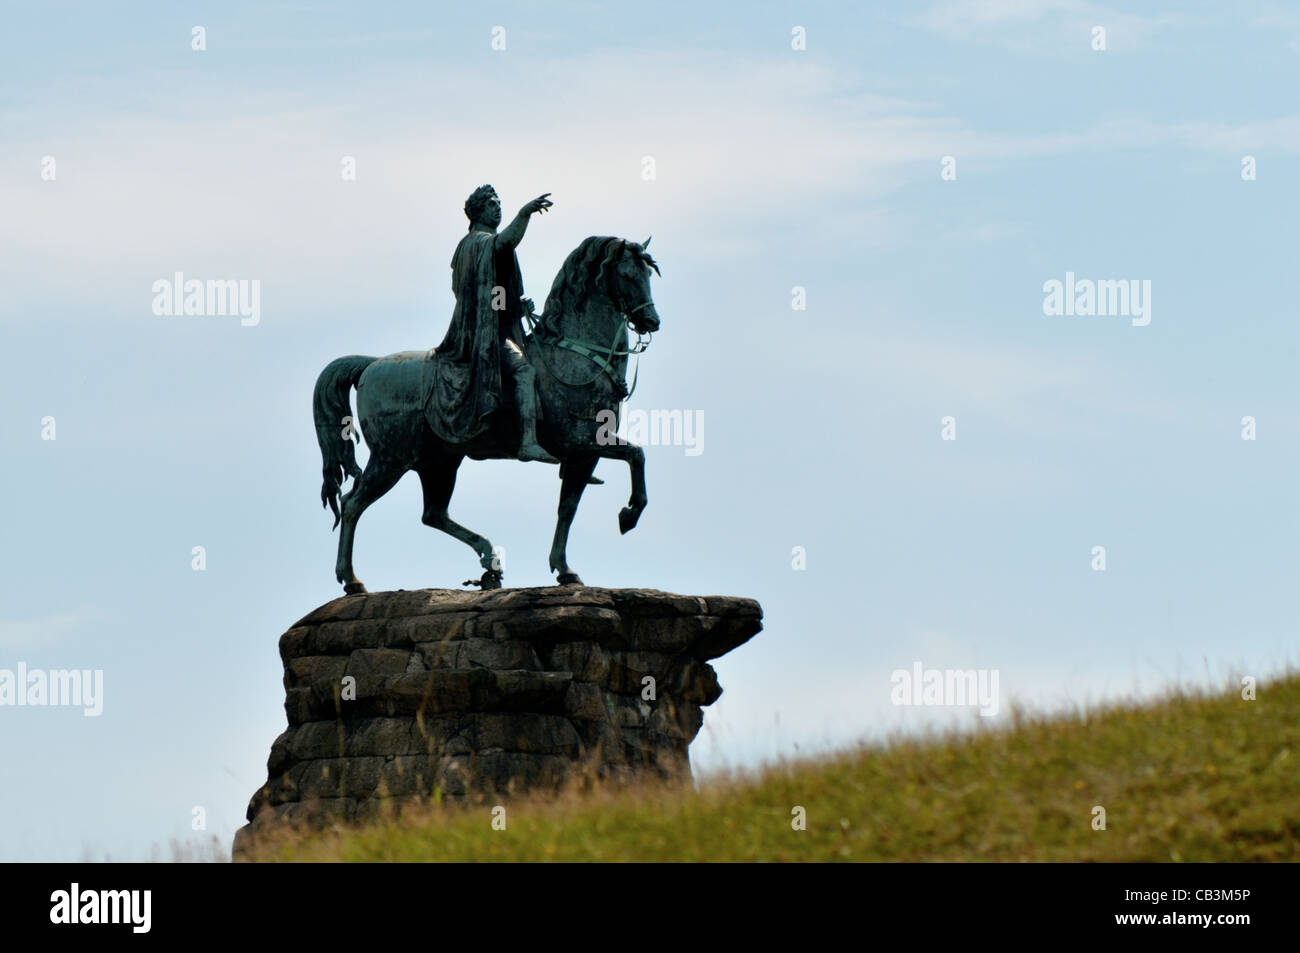 Statue of King George III on his horse at Windsor park - London, UK Stock Photo